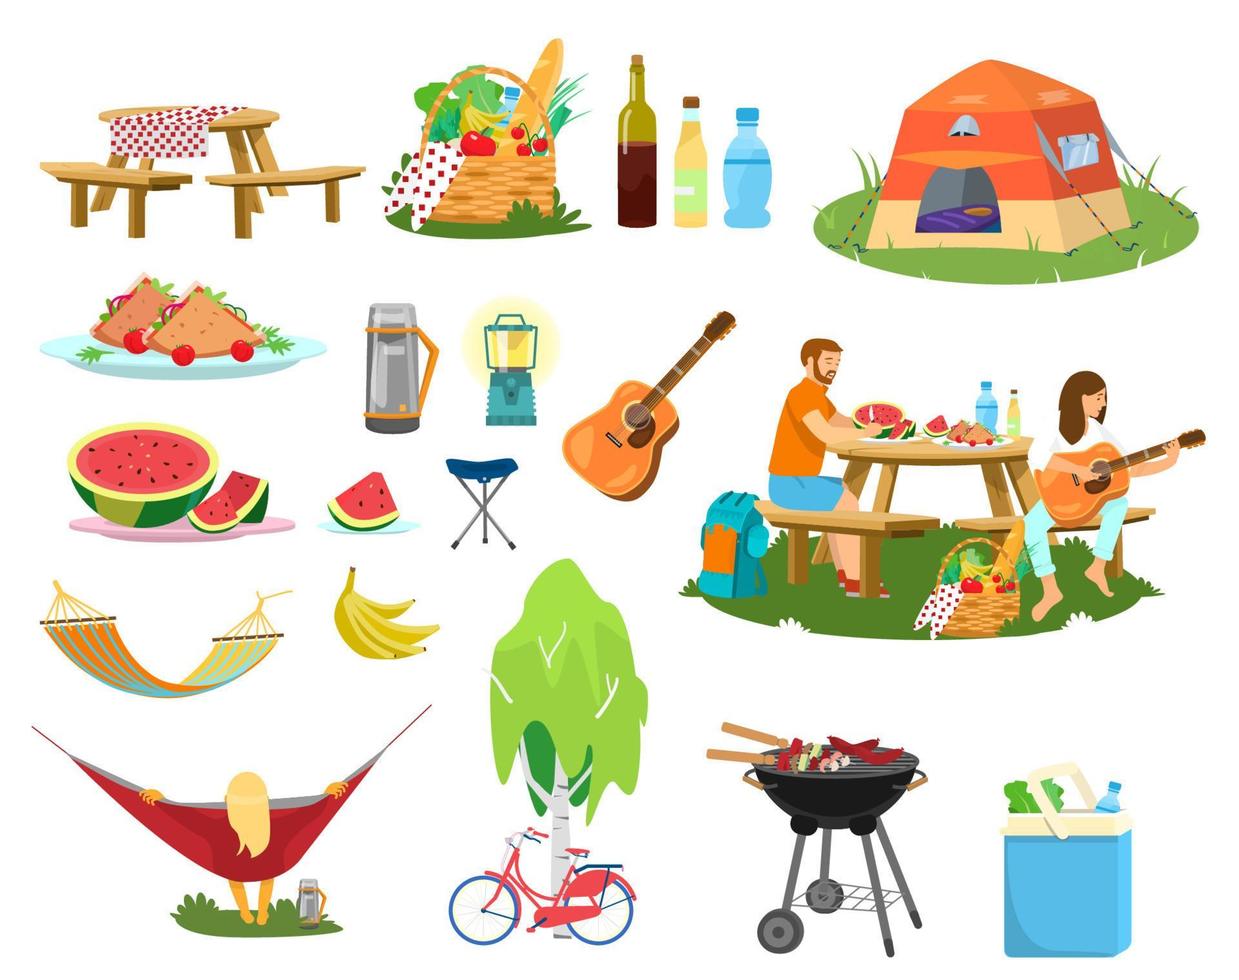 Big vector picnic set. Plates with food, picnic basket, couple having picnic, berbeque, cooler bag, bike near birch, guitar, thermos, drinks, woman relaxing in hammock, tent.